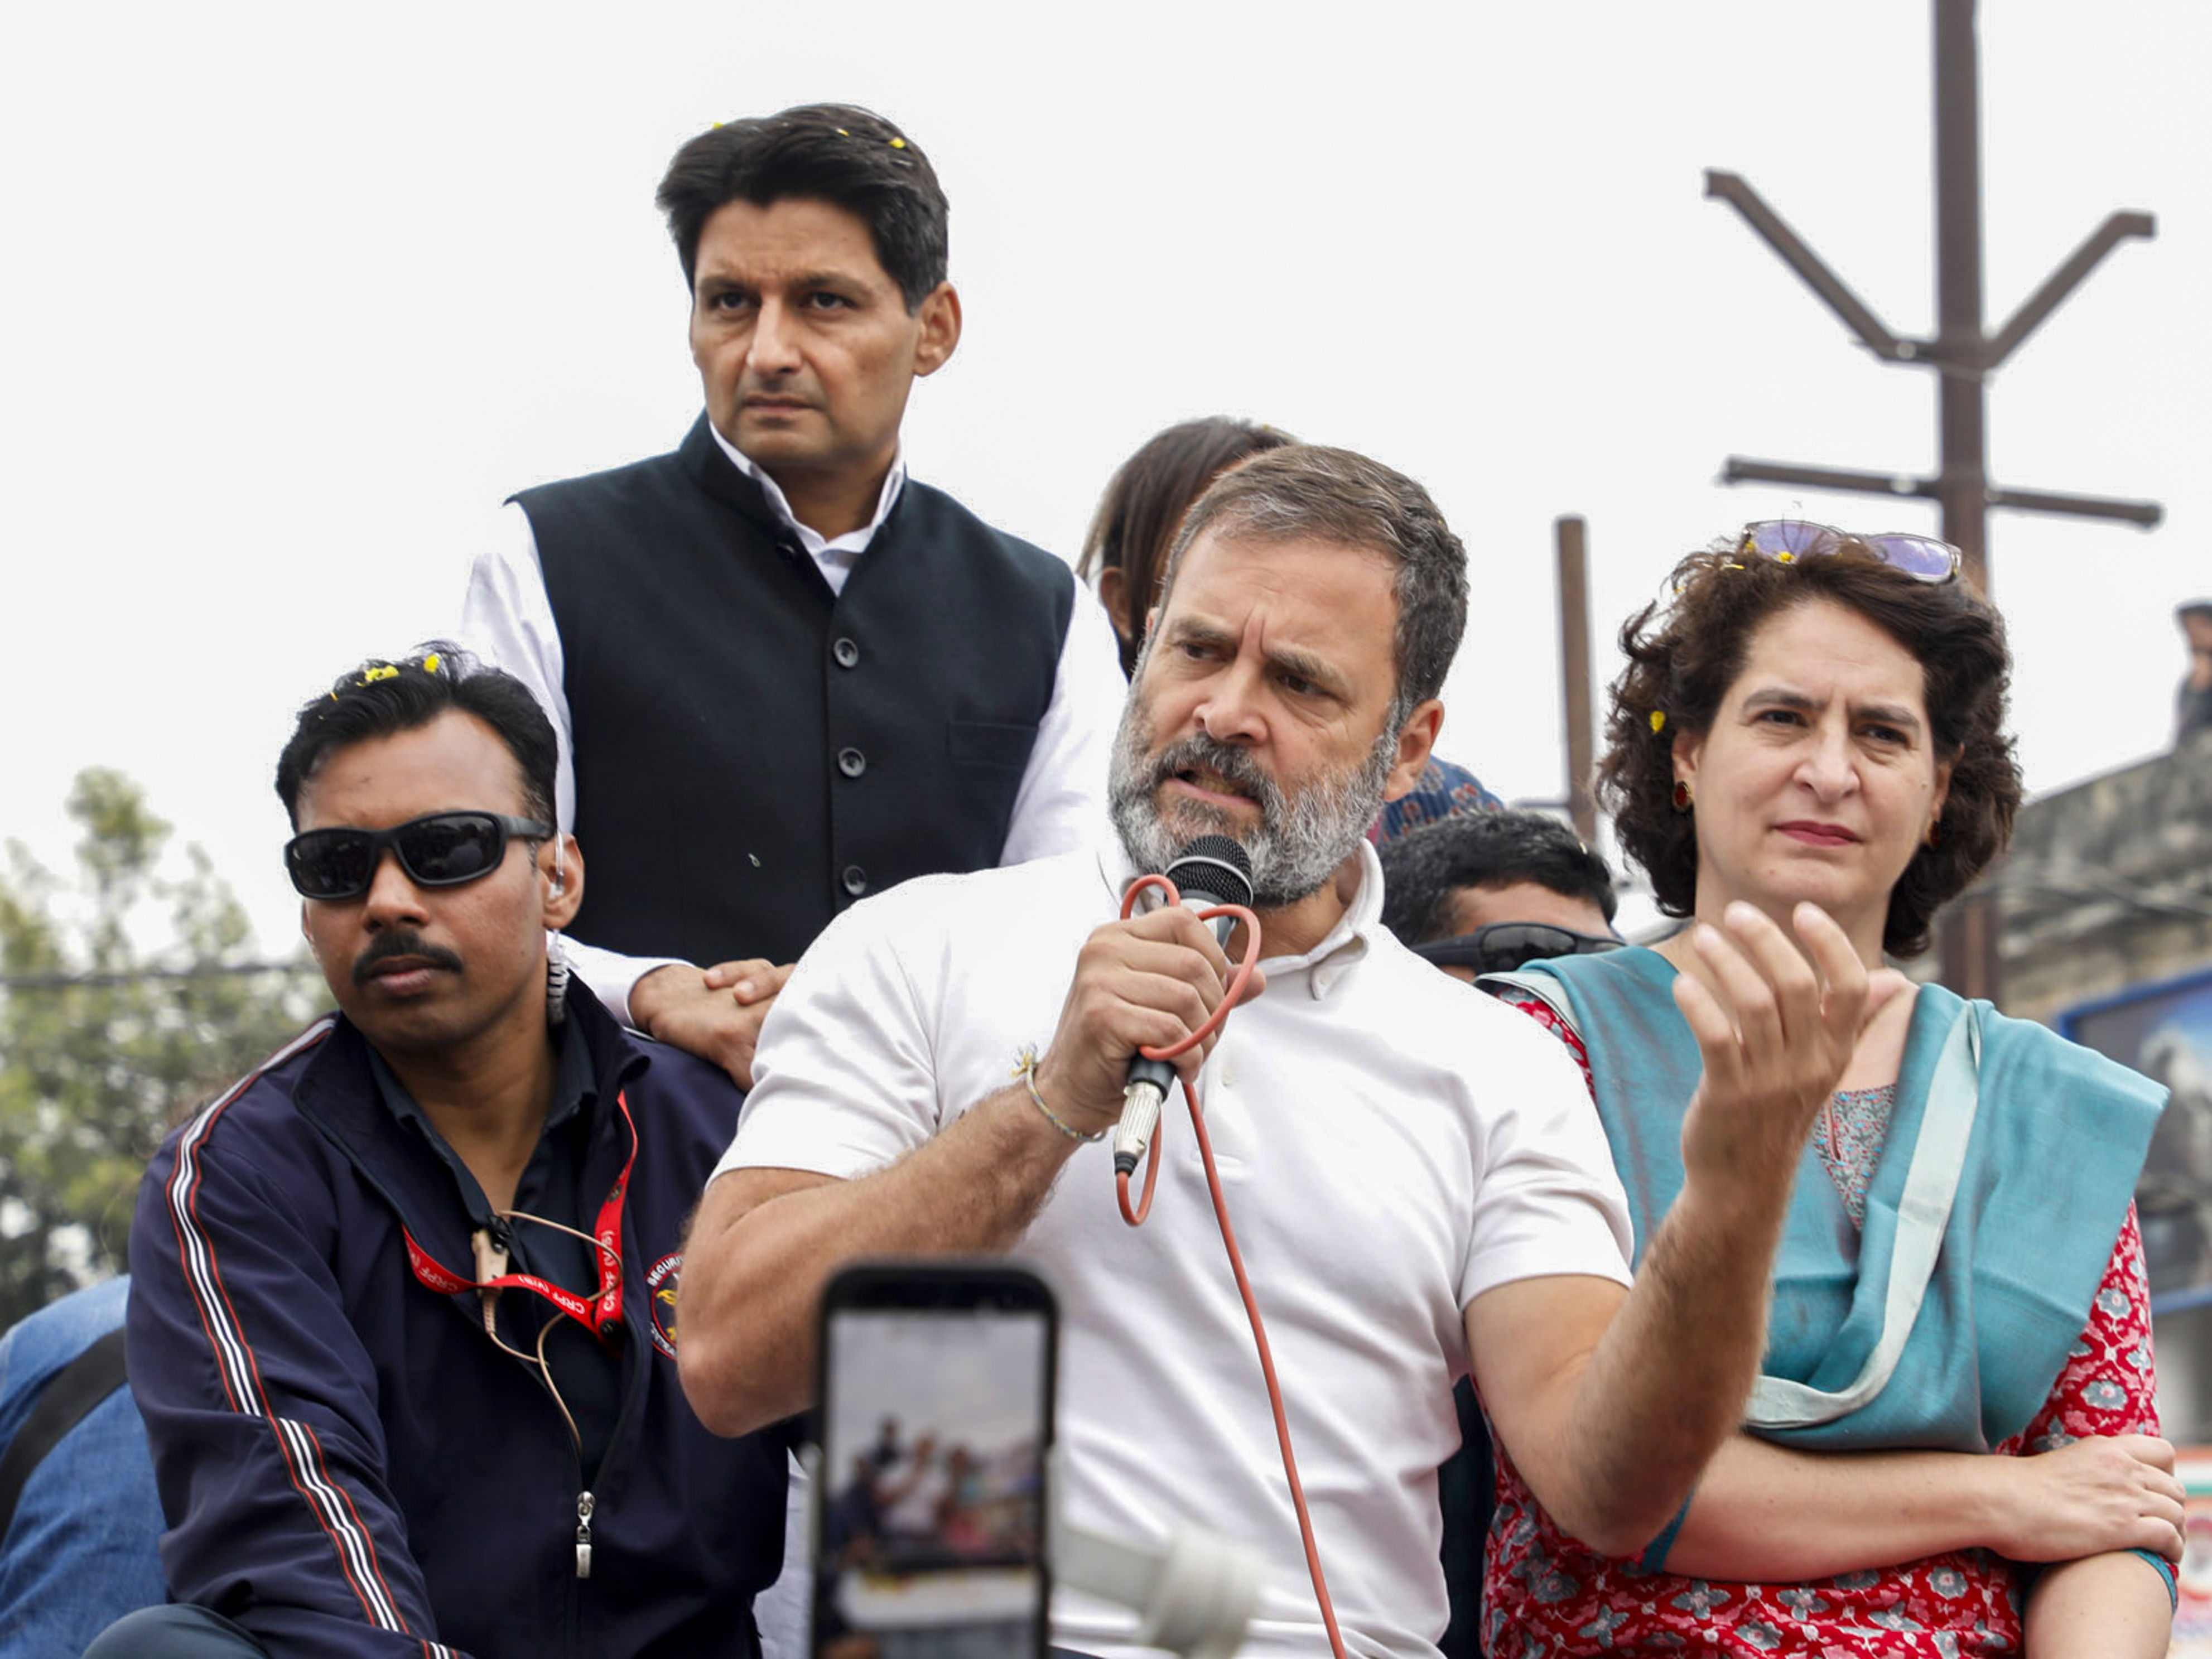 small industries, artisans suffering in country as chinese goods flooding markets: rahul